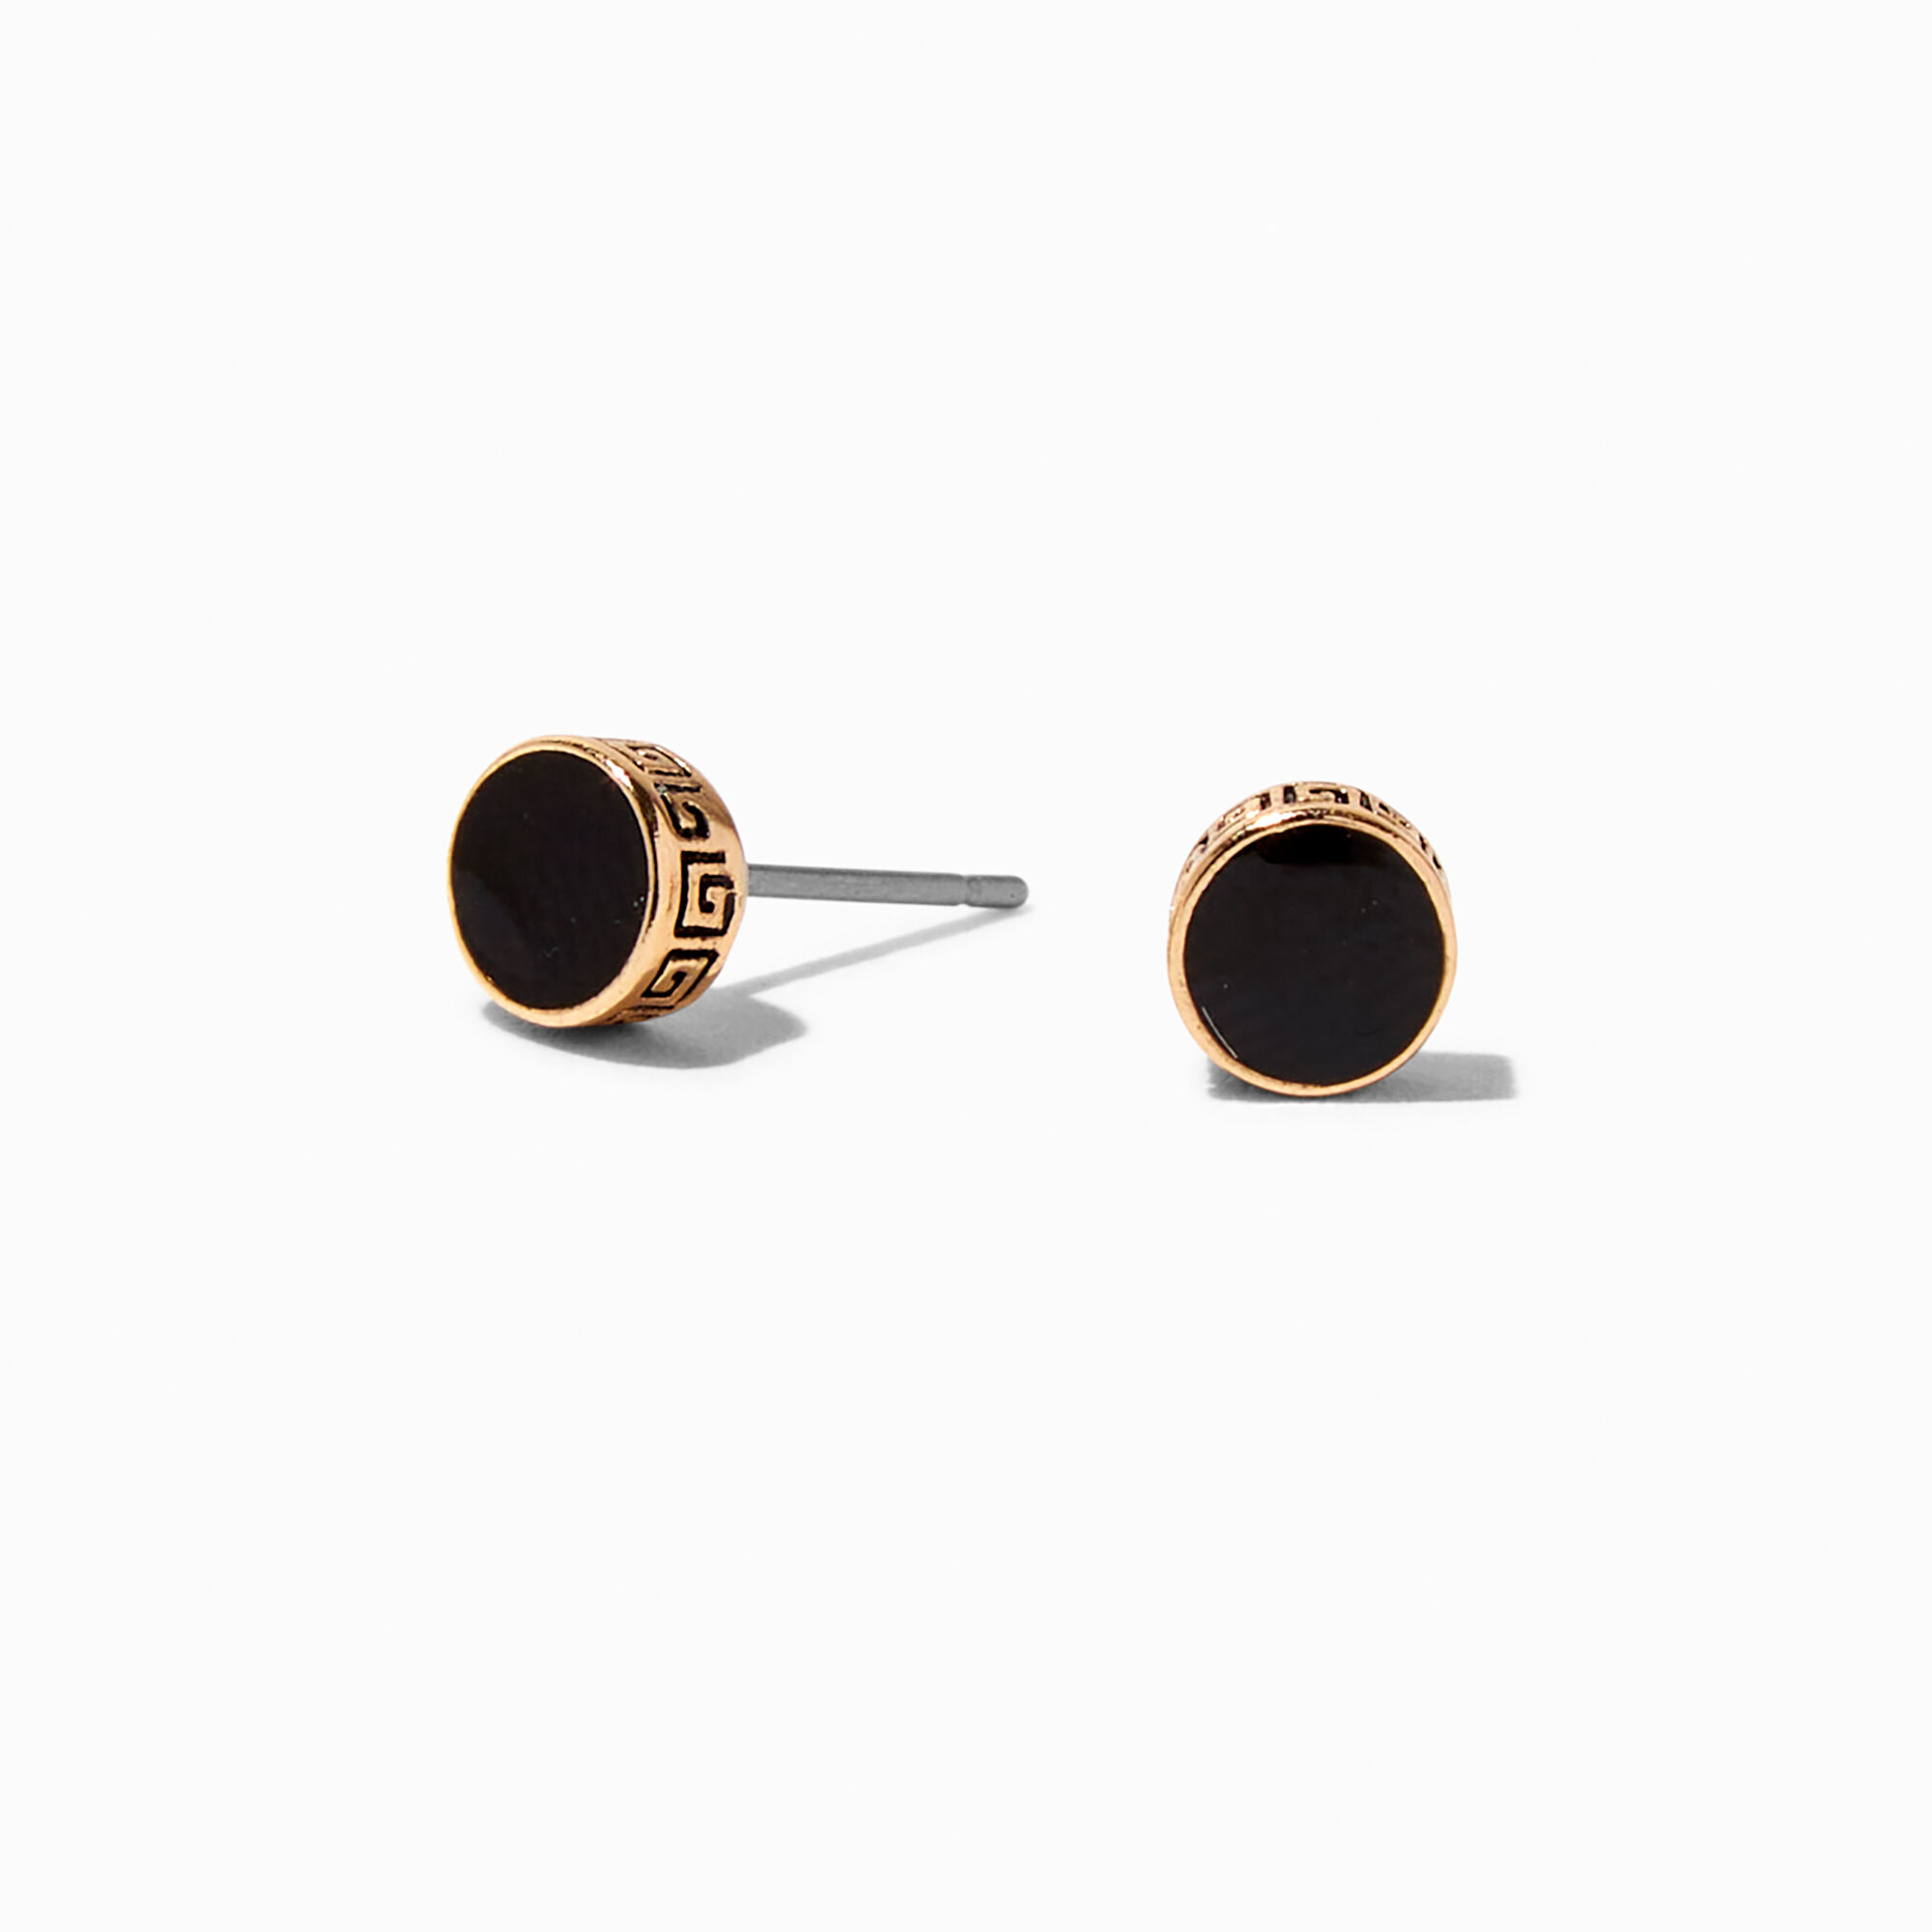 View Claires Gold Geometric Print Stud Earrings Black information